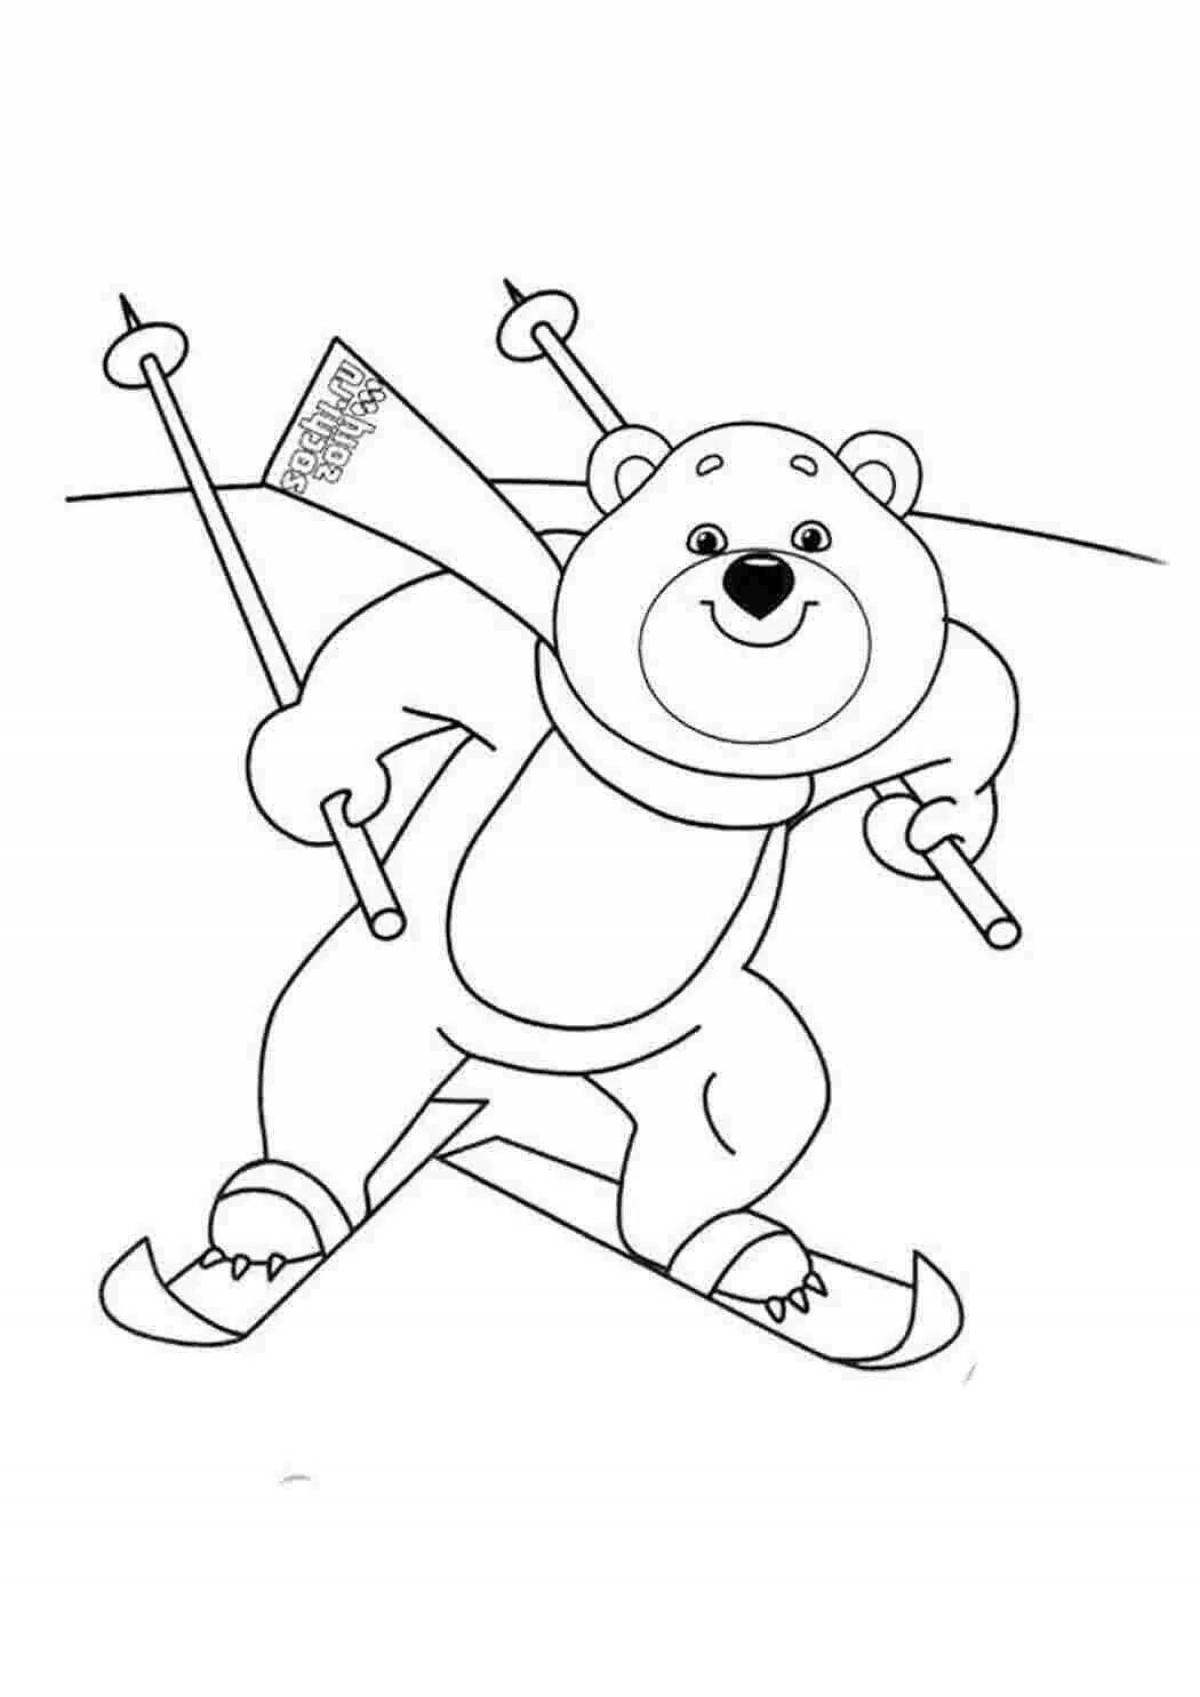 Wonderful olympic bear coloring for kids